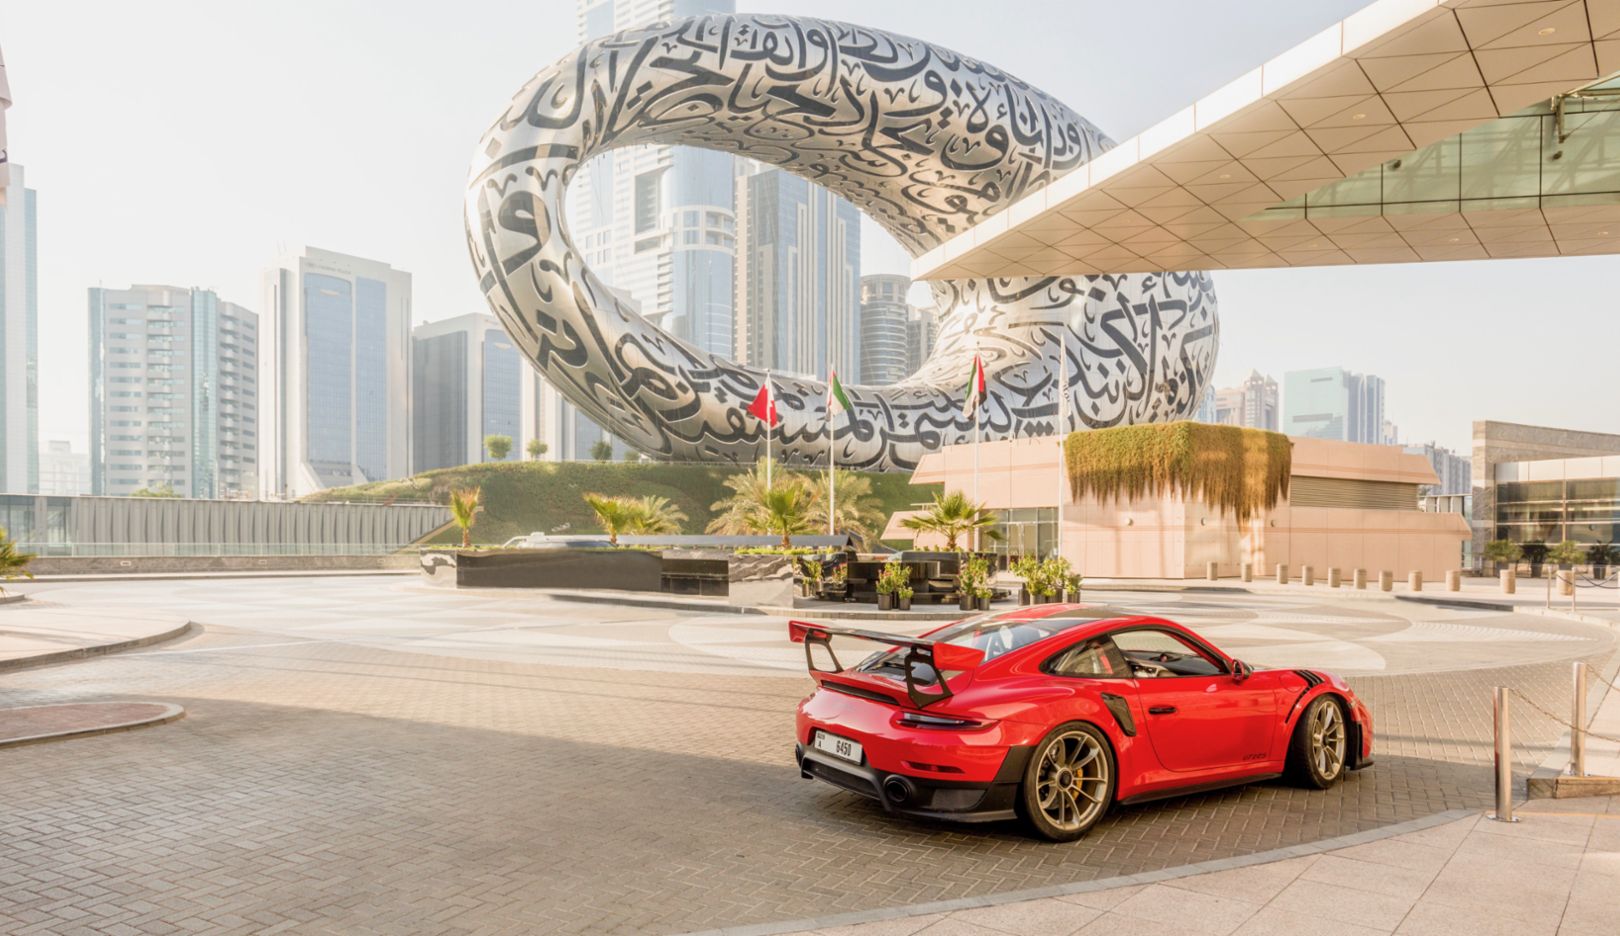 An extraordinary experience: Going for a spin with Karim Al Azhari through Dubai. The Porsche 911 GT2 RS cuts a good figure in front of the Museum of the Future.